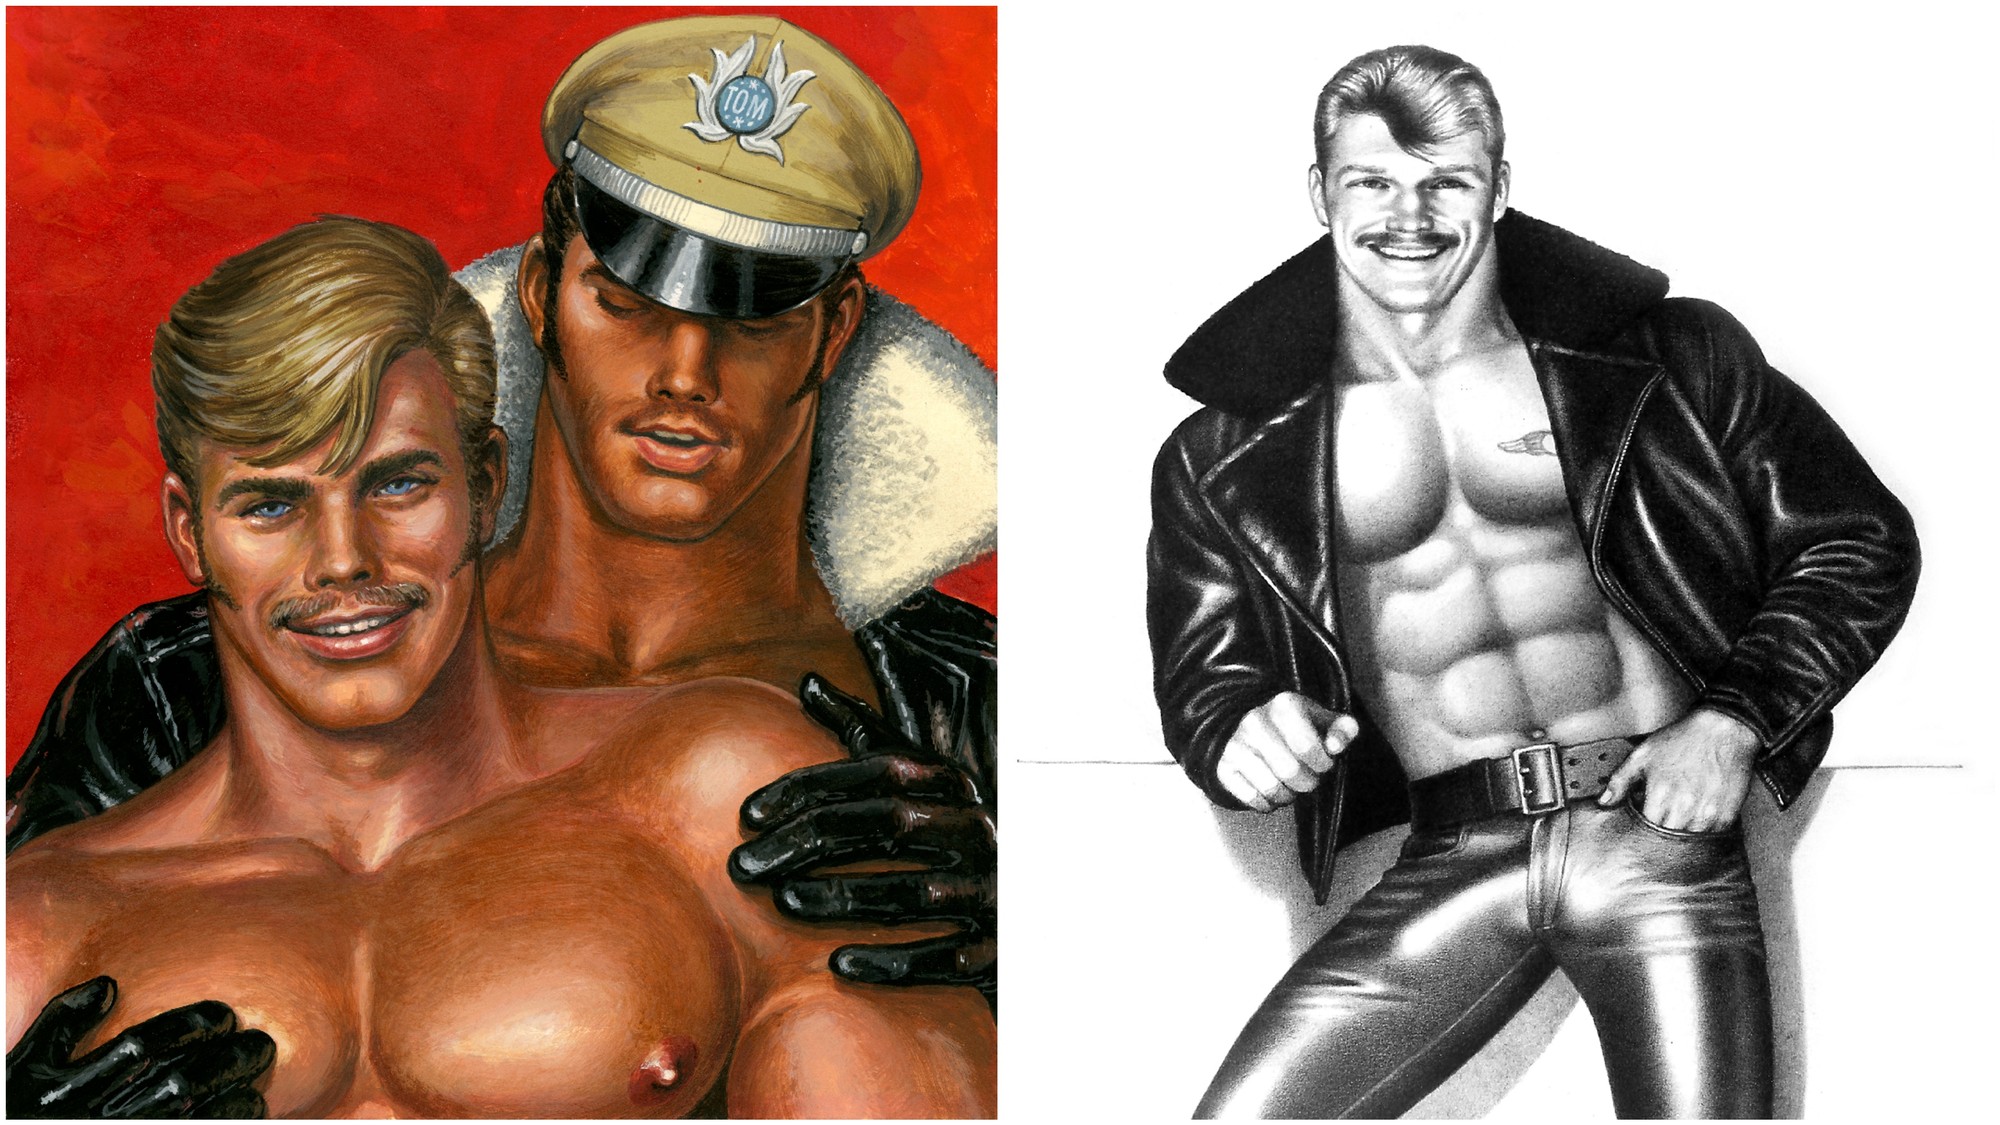 Tom Of Finland Cartoon - Tom of Finland's Explicit Art Radically Changed How We View ...